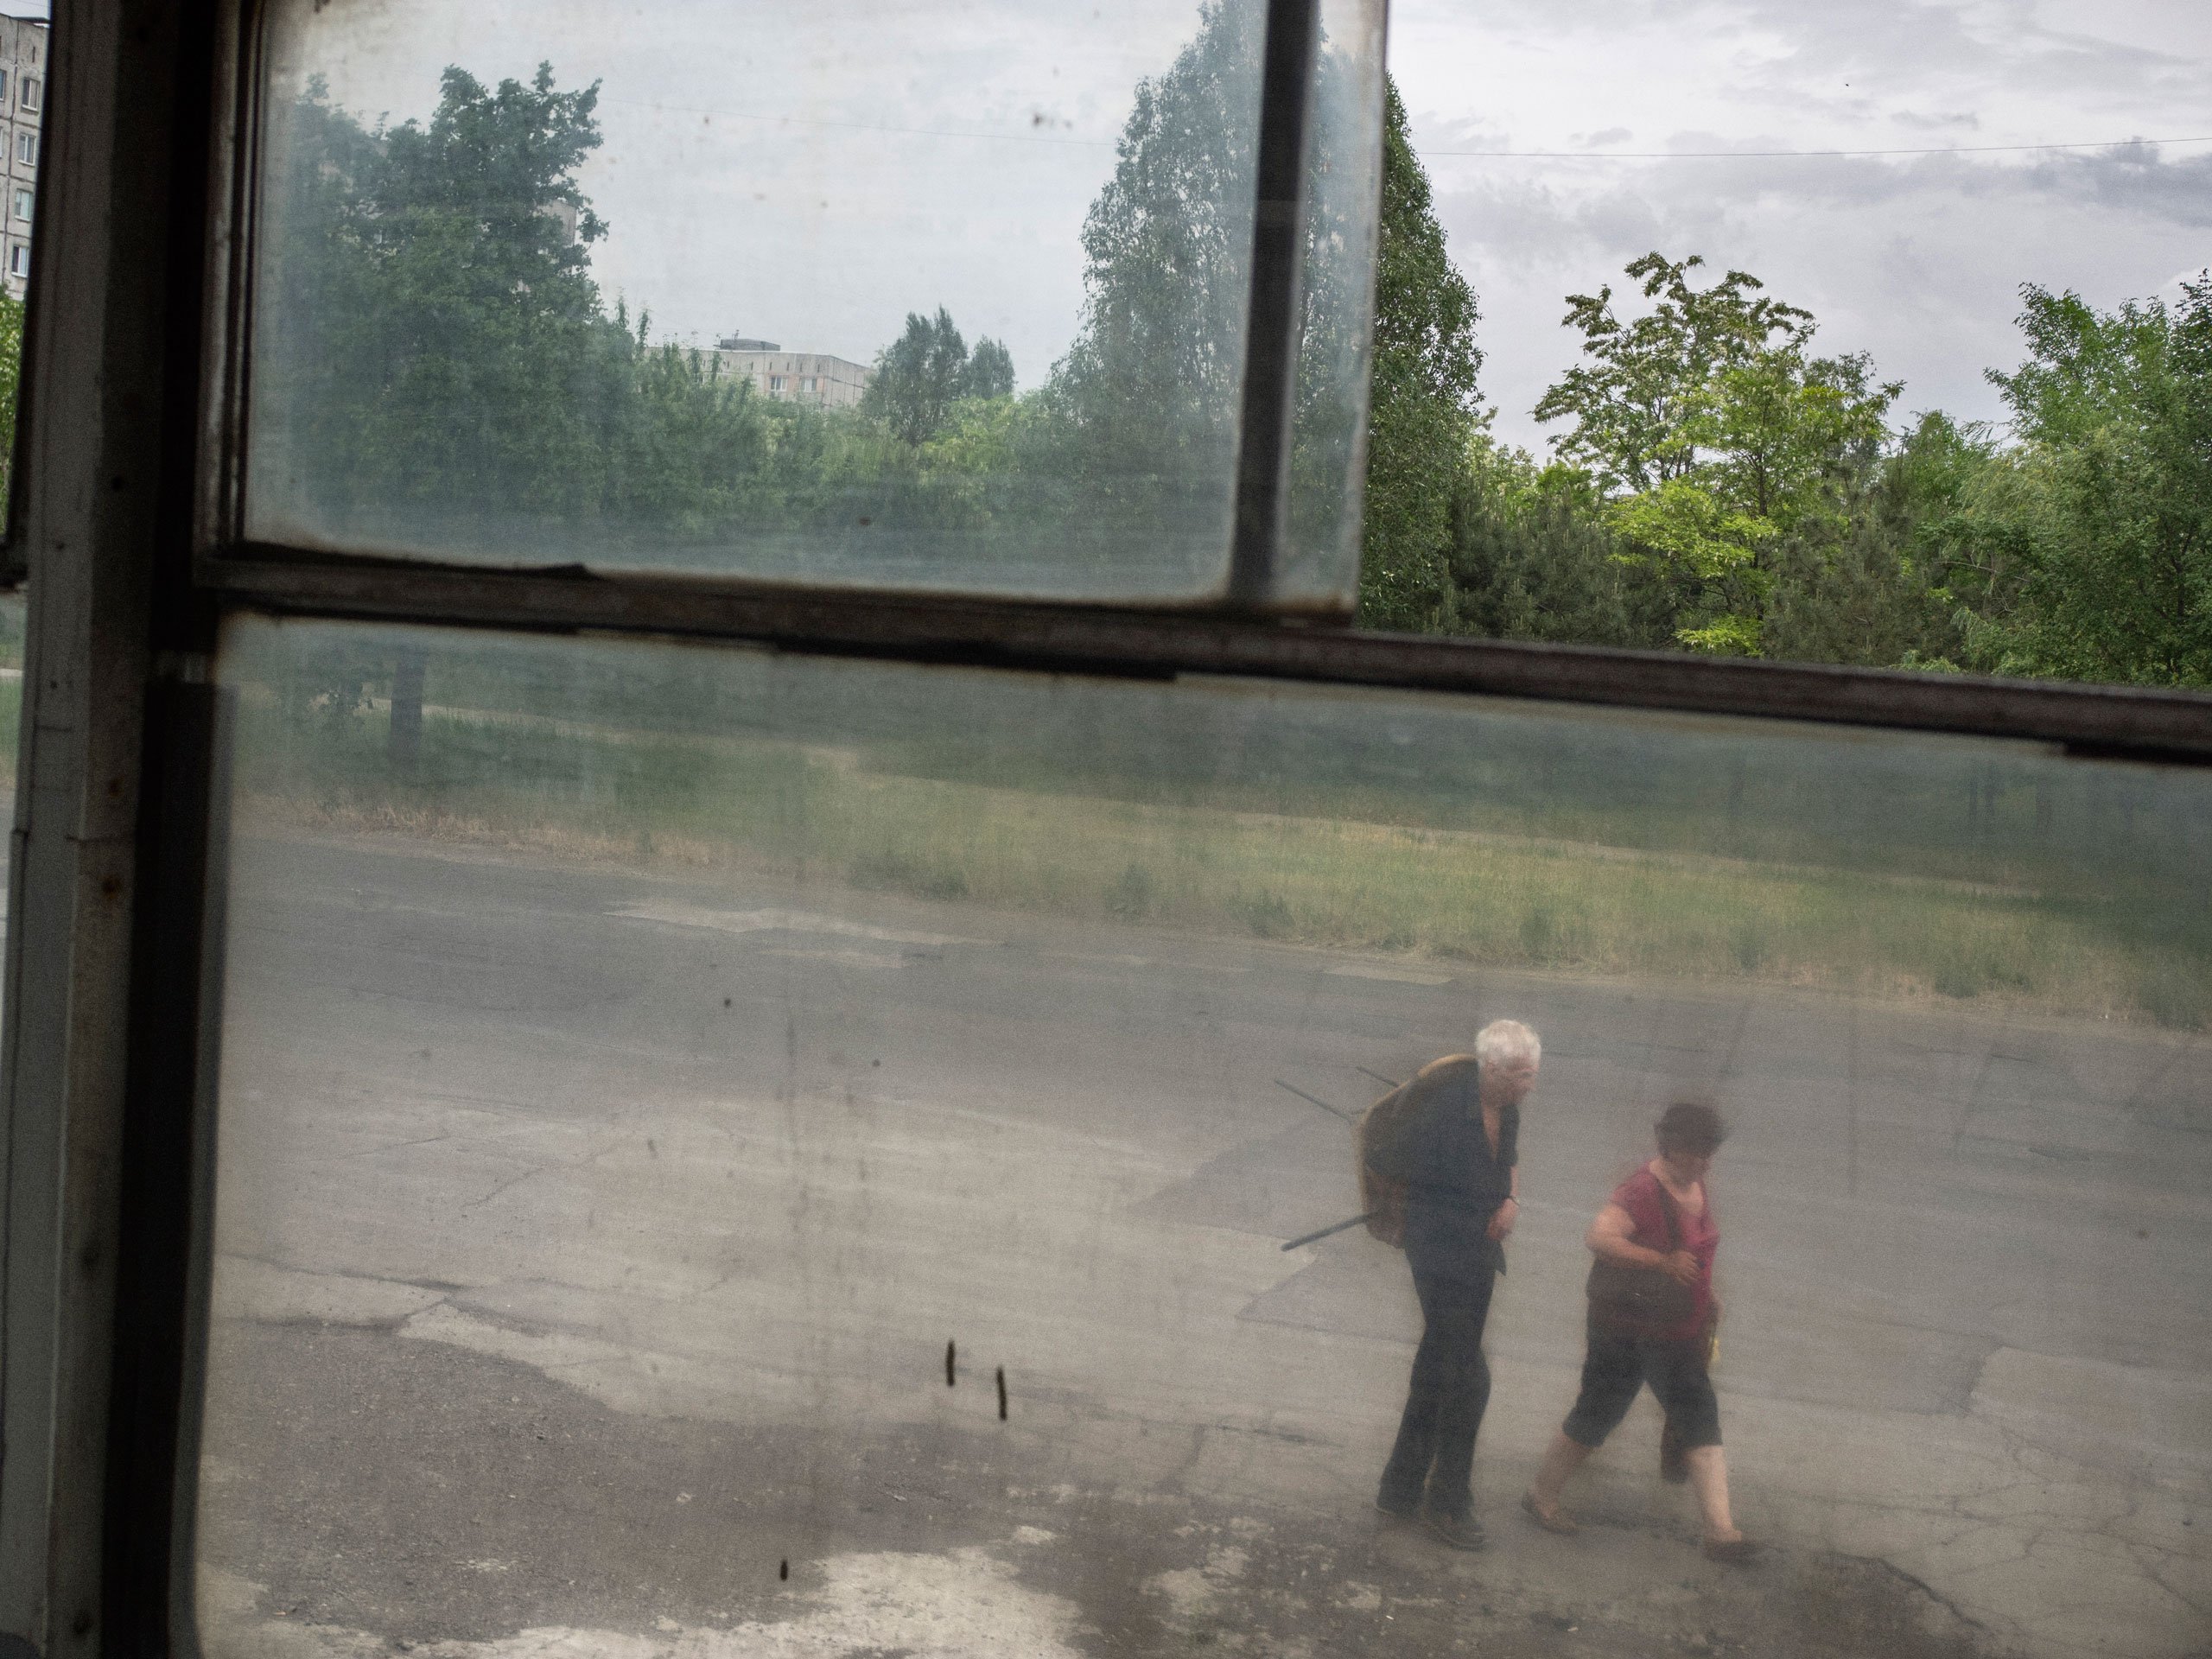 Two elderly people walk, as seen through a window on the tramway. Mariupol, Ukraine. May 28, 2015.